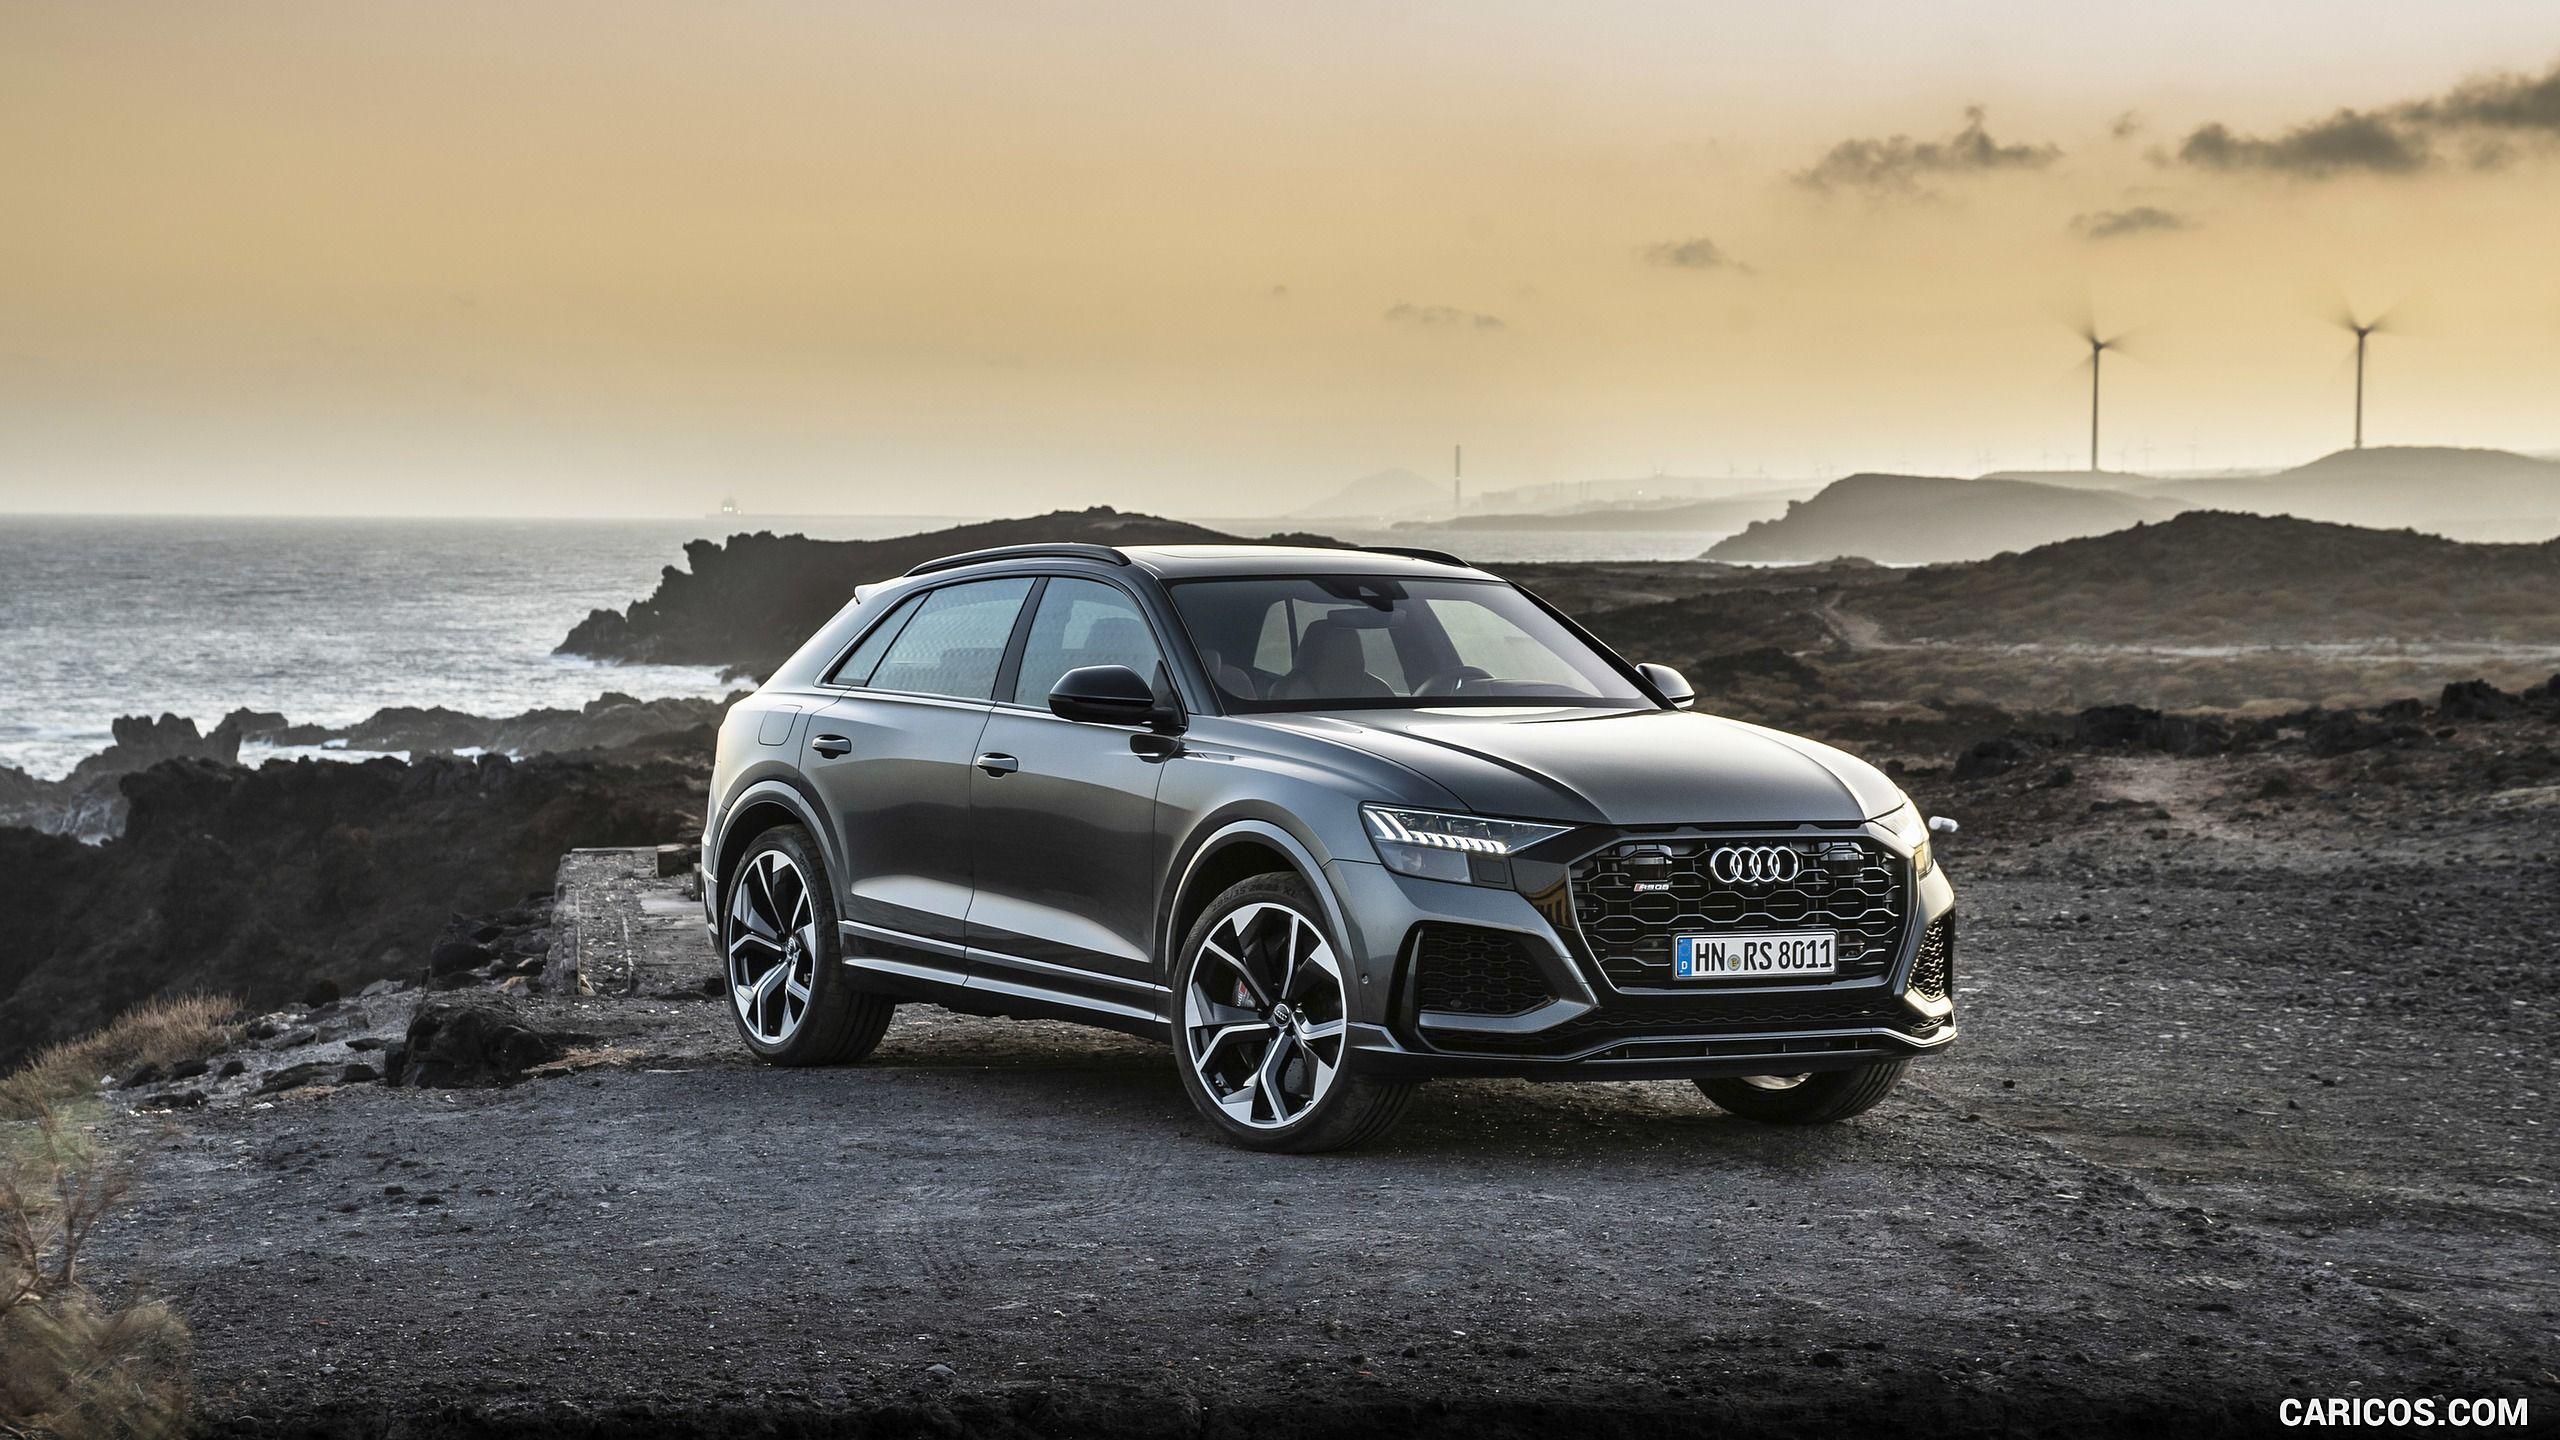 Audi Rs Q8 Wallpapers Top Free Audi Rs Q8 Backgrounds Wallpaperaccess